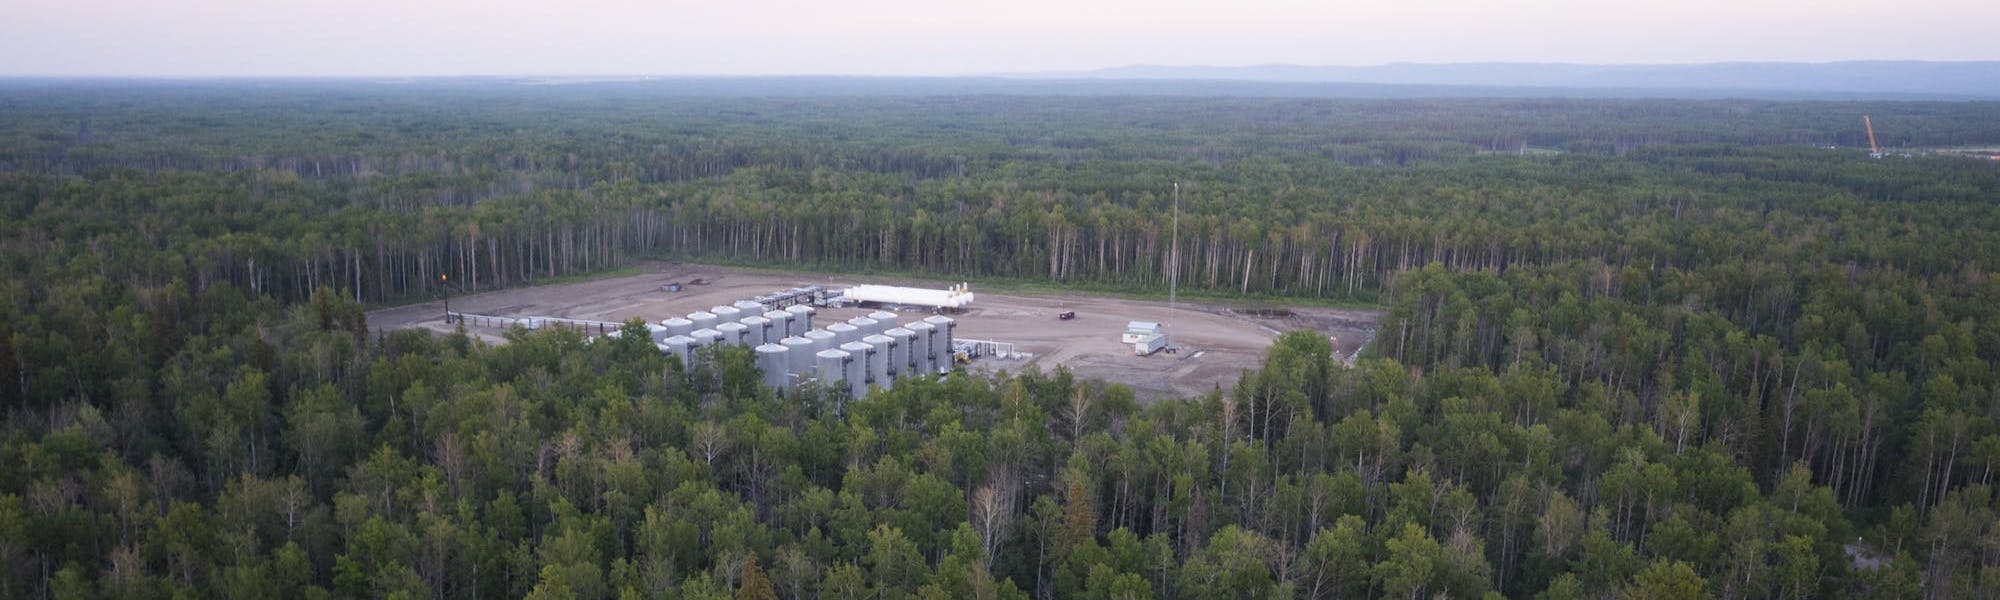 An aerial view of a gas plant in a dense forest.